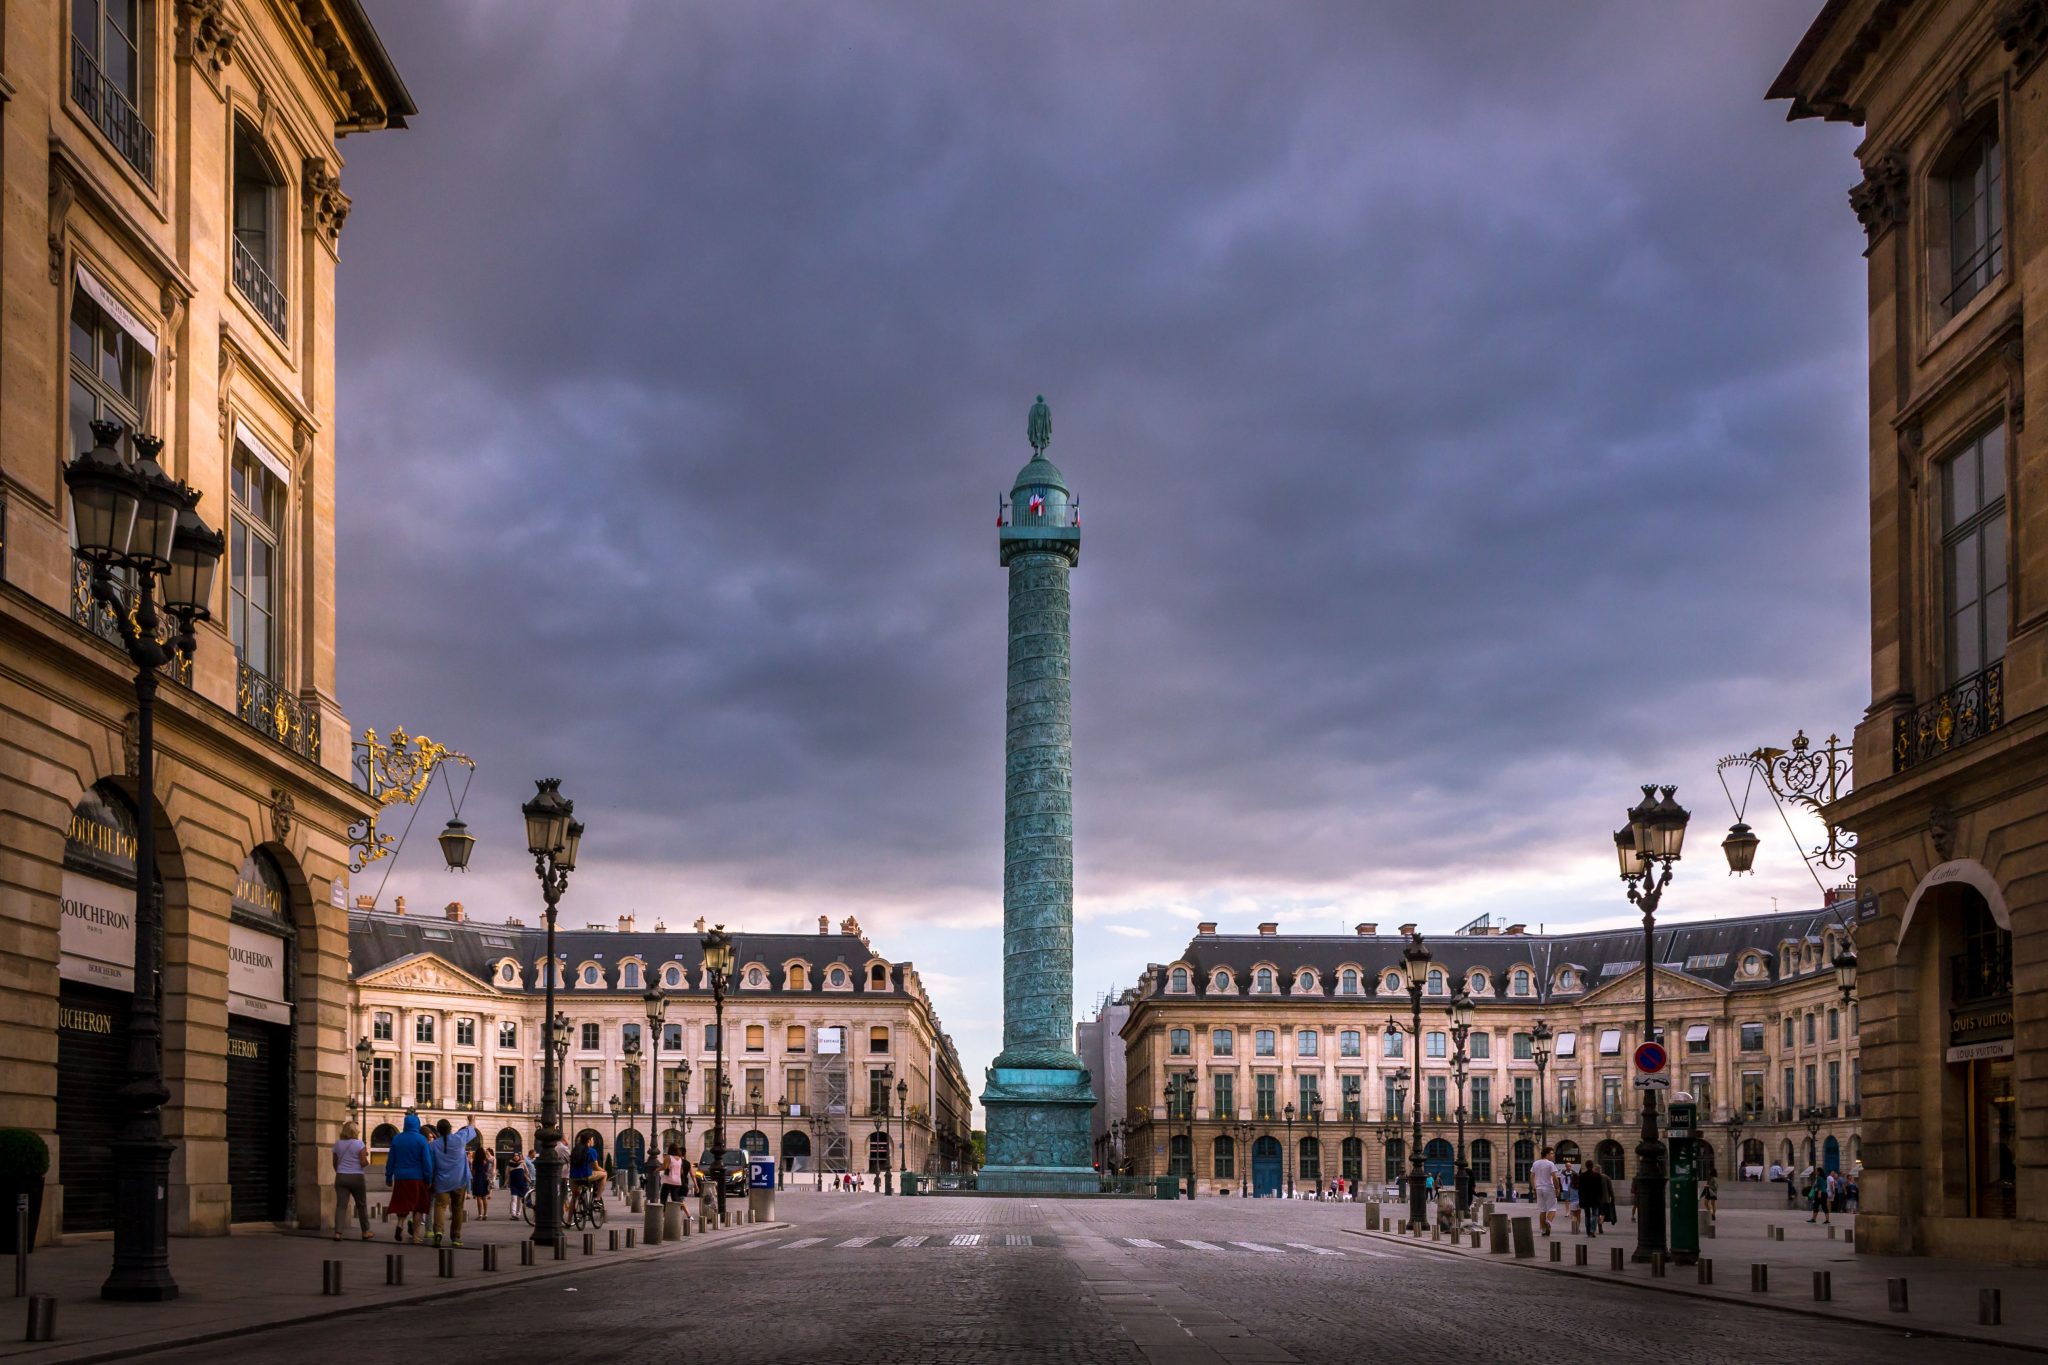 A professional photo of the Place Vendôme in Paris, France on a cloudy day.